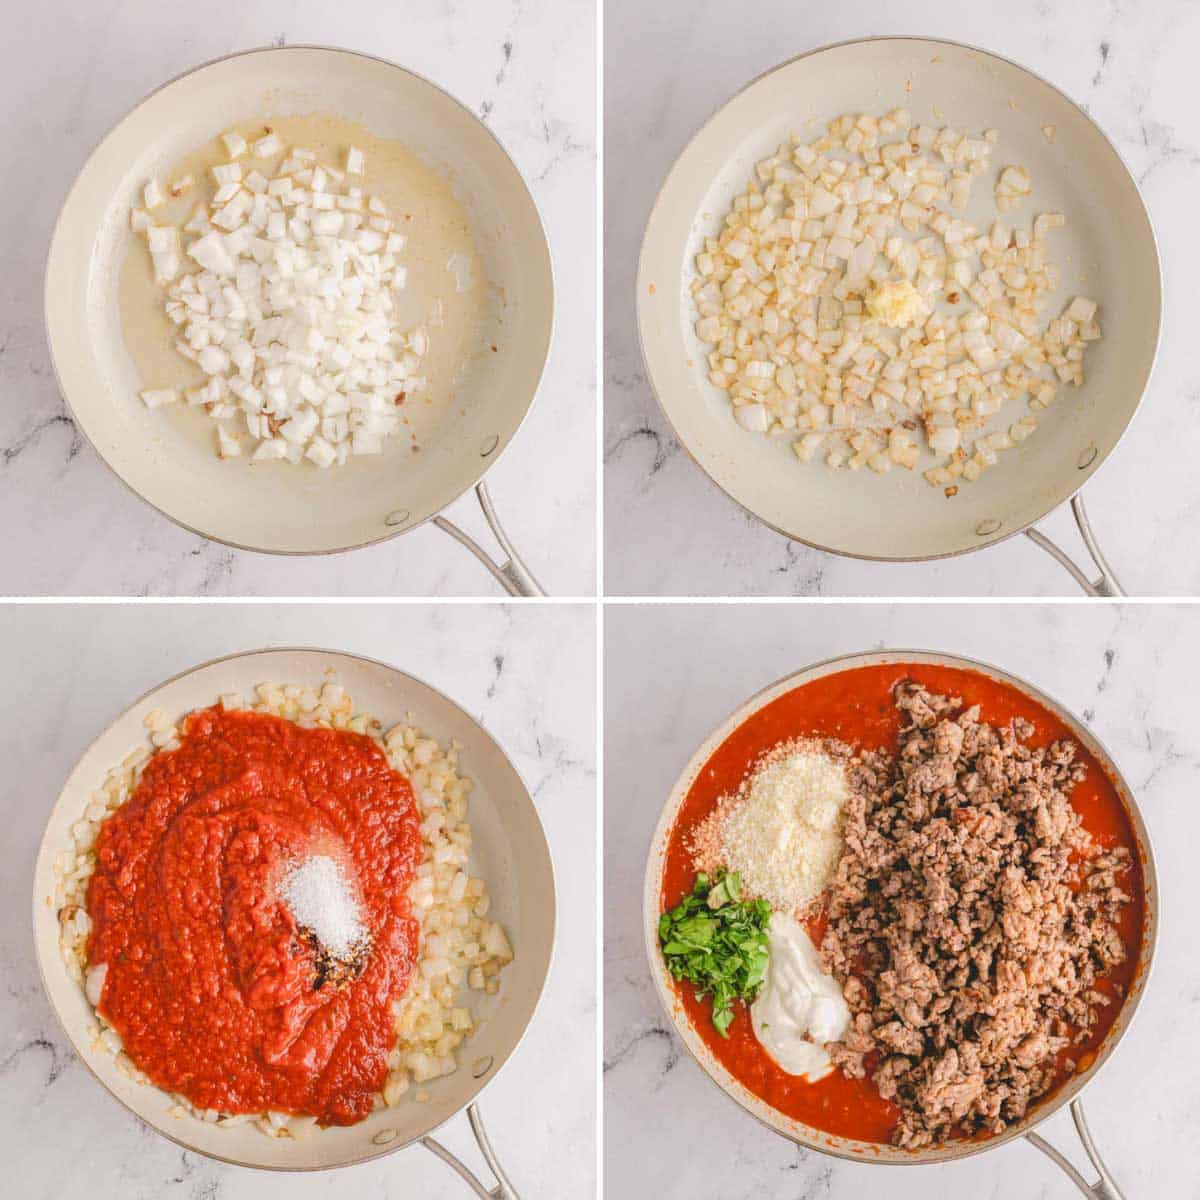 Four images showing the process of sautéing onions and combining them with ingredients to make a baked ziti sauce.